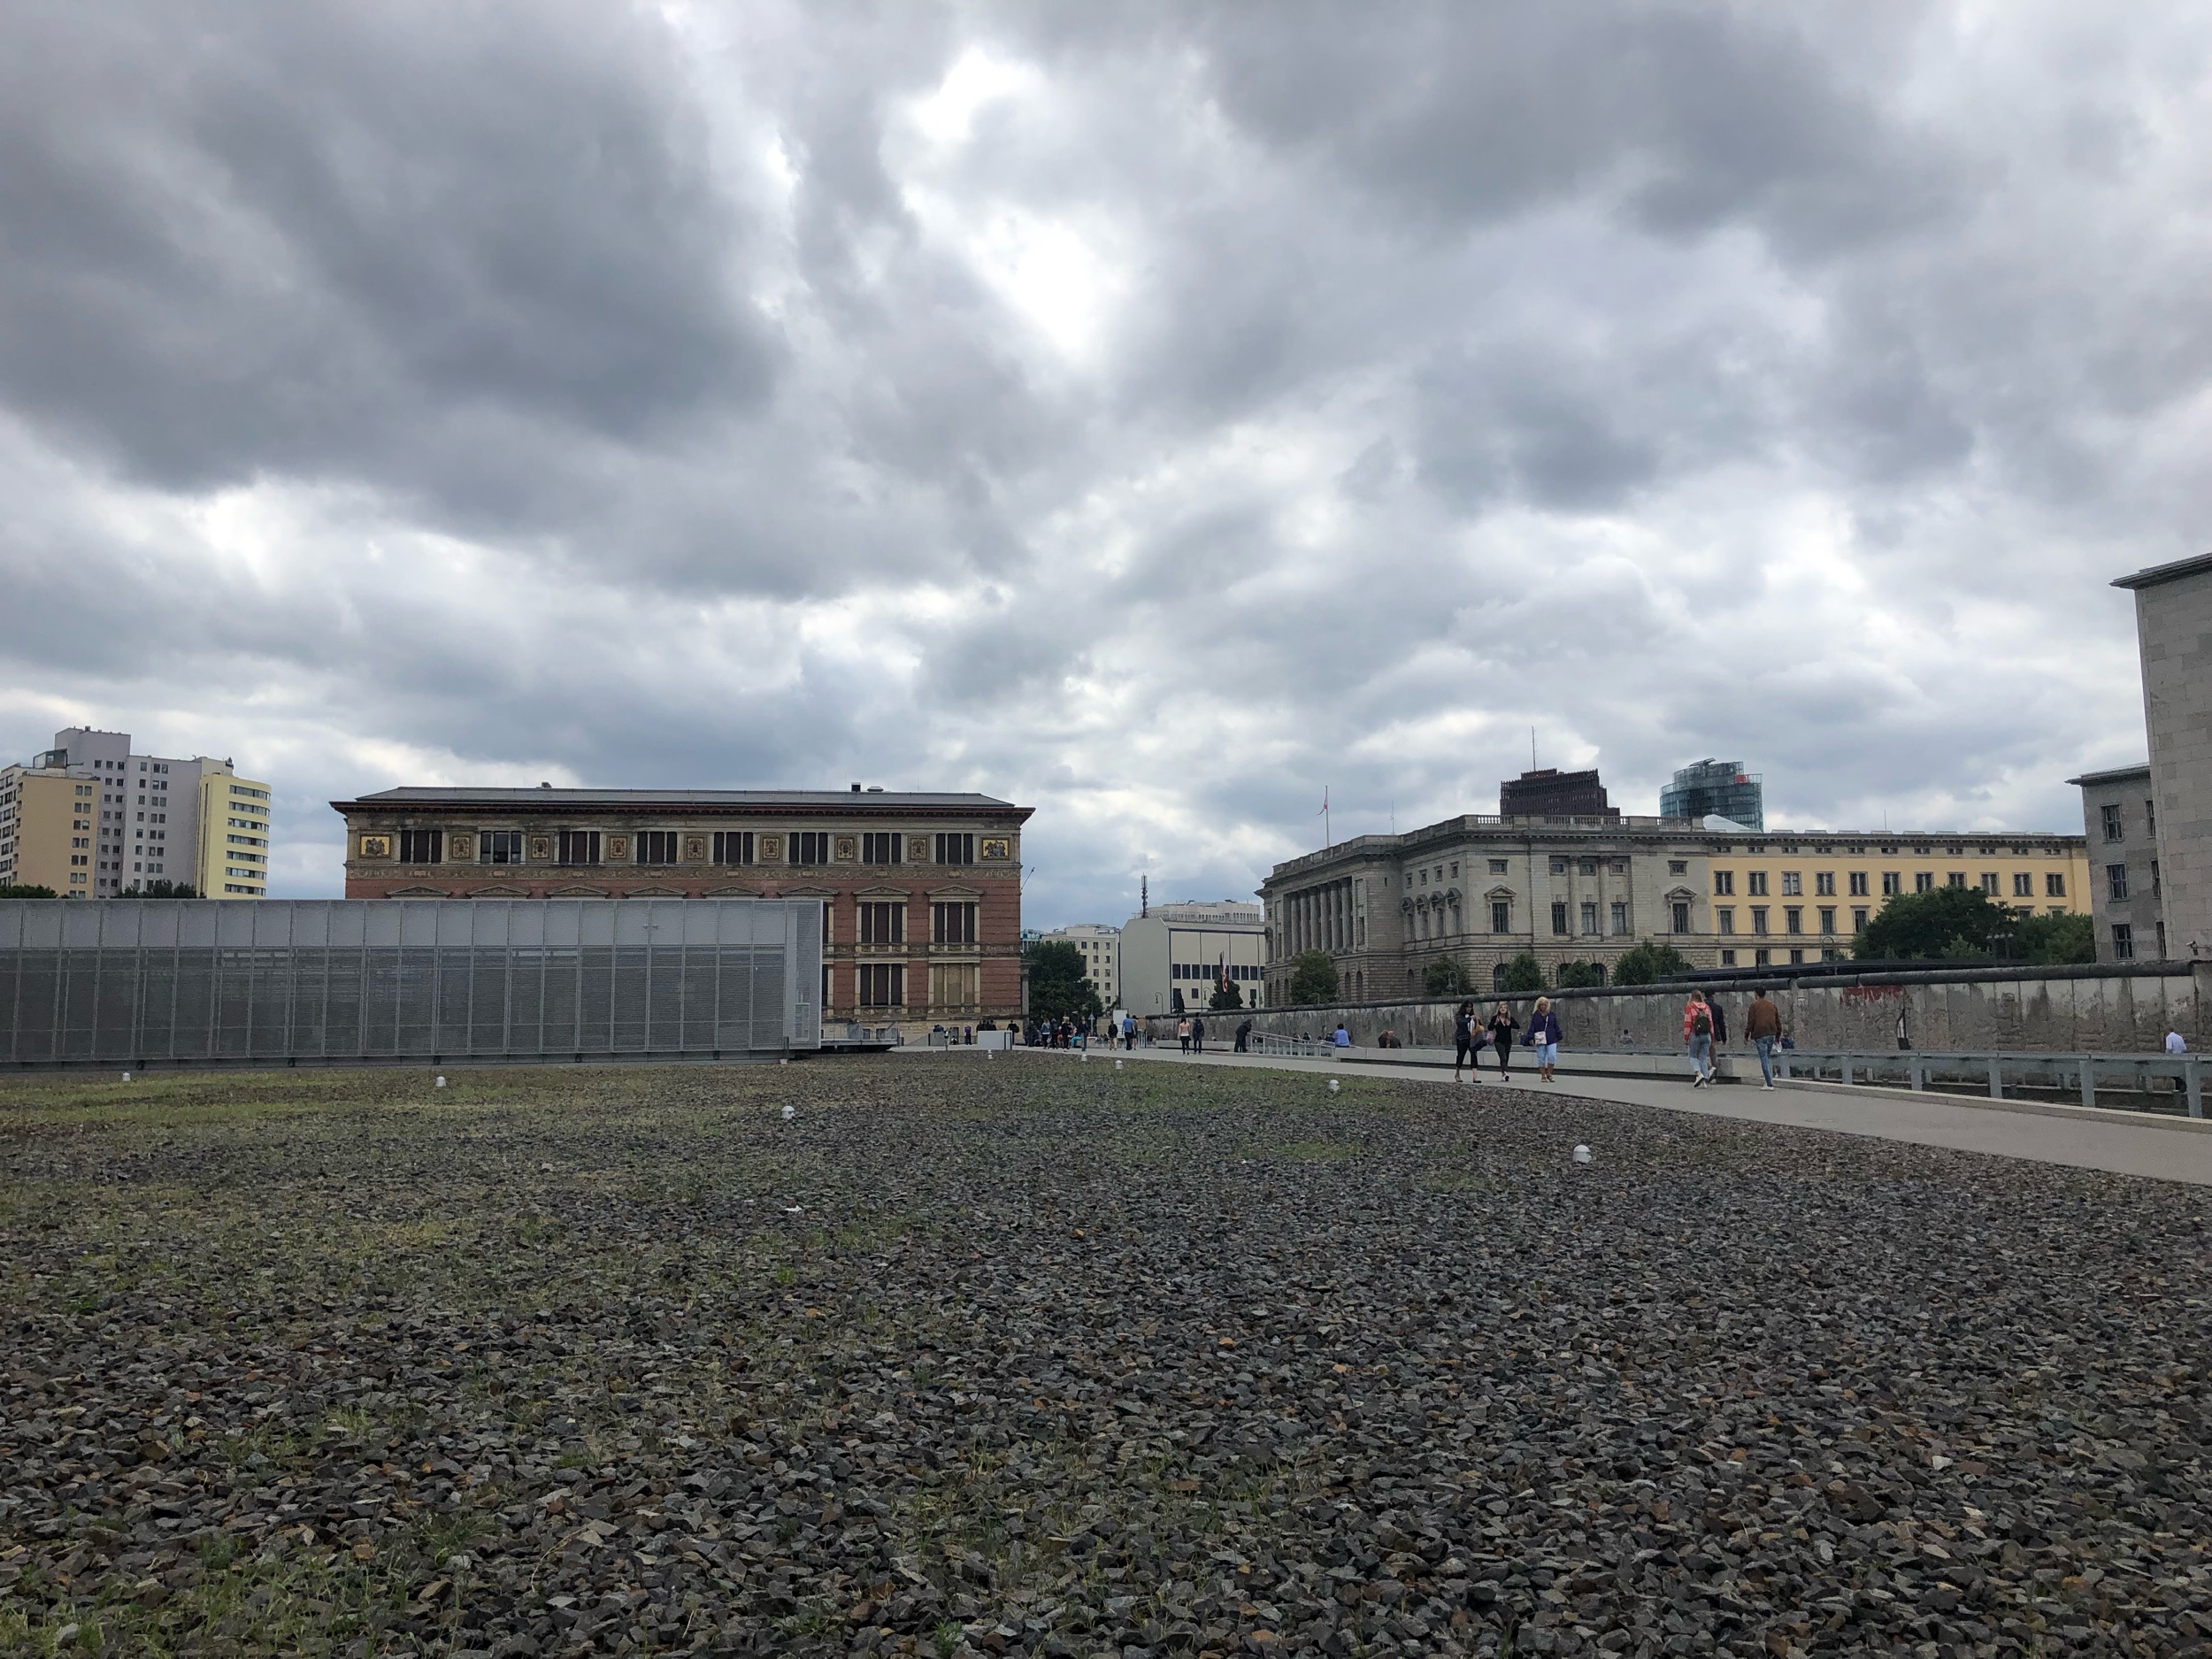  The lower silver building is the Topography of Terror. This location houses the headquarters of the Gestapo. Here you can also see a part of the Berlin Wall, and simultaneously view East and West Berlin.&nbsp; 